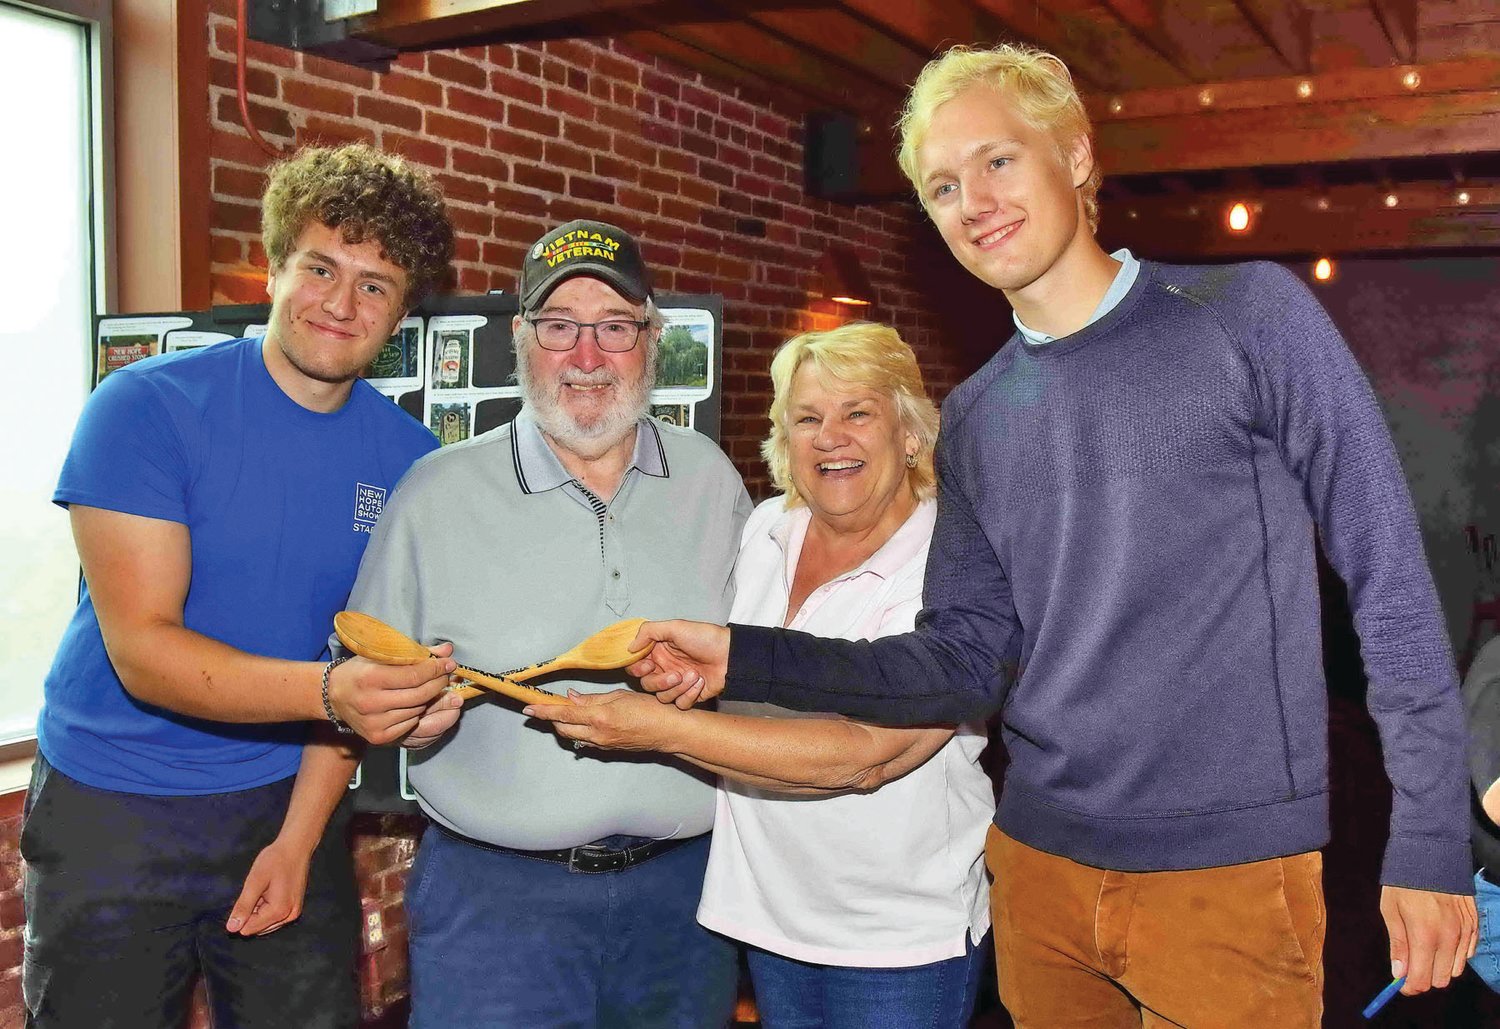 Pat and Tina Smith receive the traditional wooden spoons for finishing in last place from Rally Masters Josh Eisen and Trey Dusek.